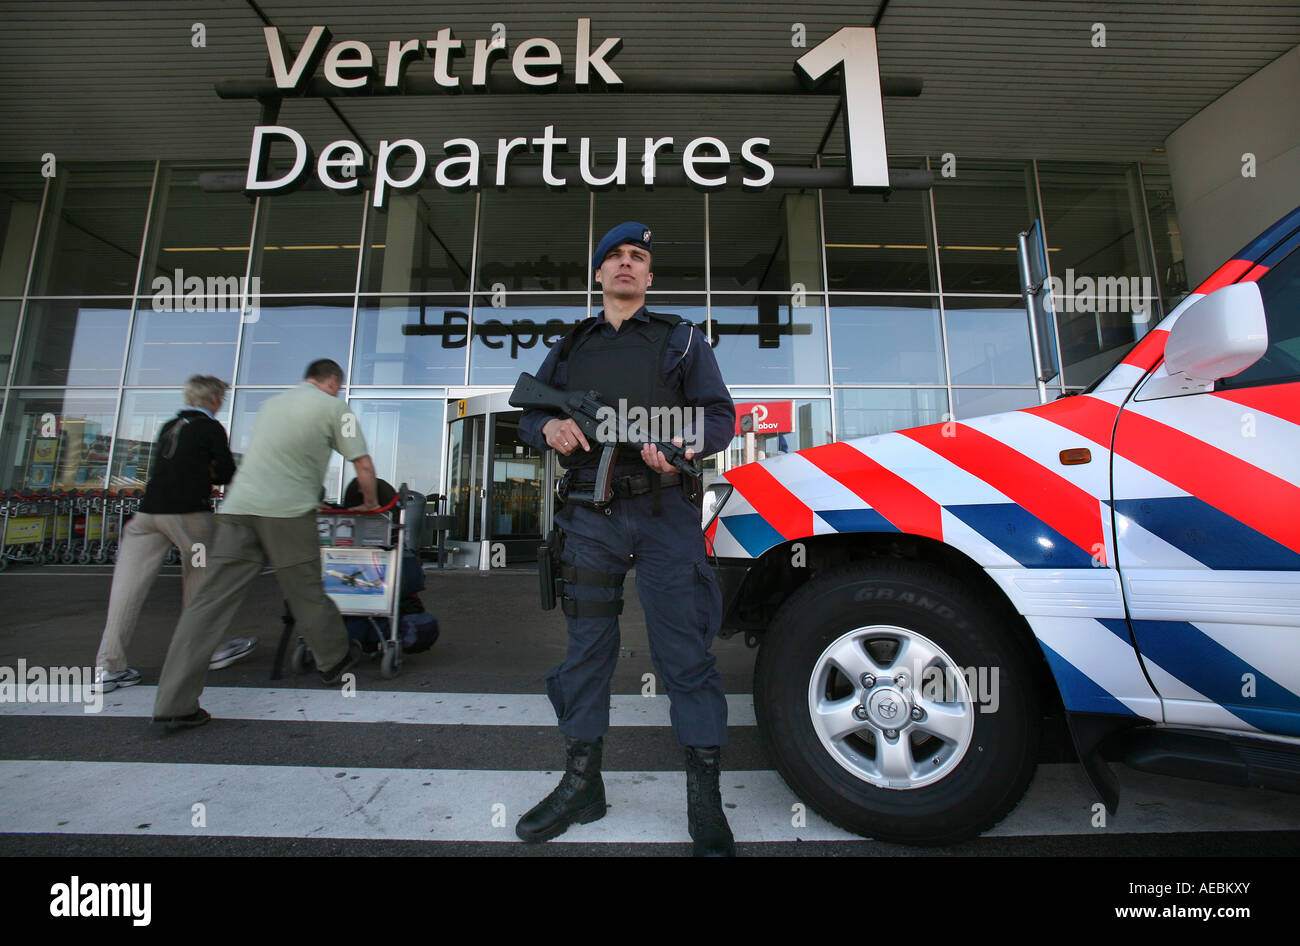 Border control at Schiphol airport editorial use only no negative publicity Stock Photo